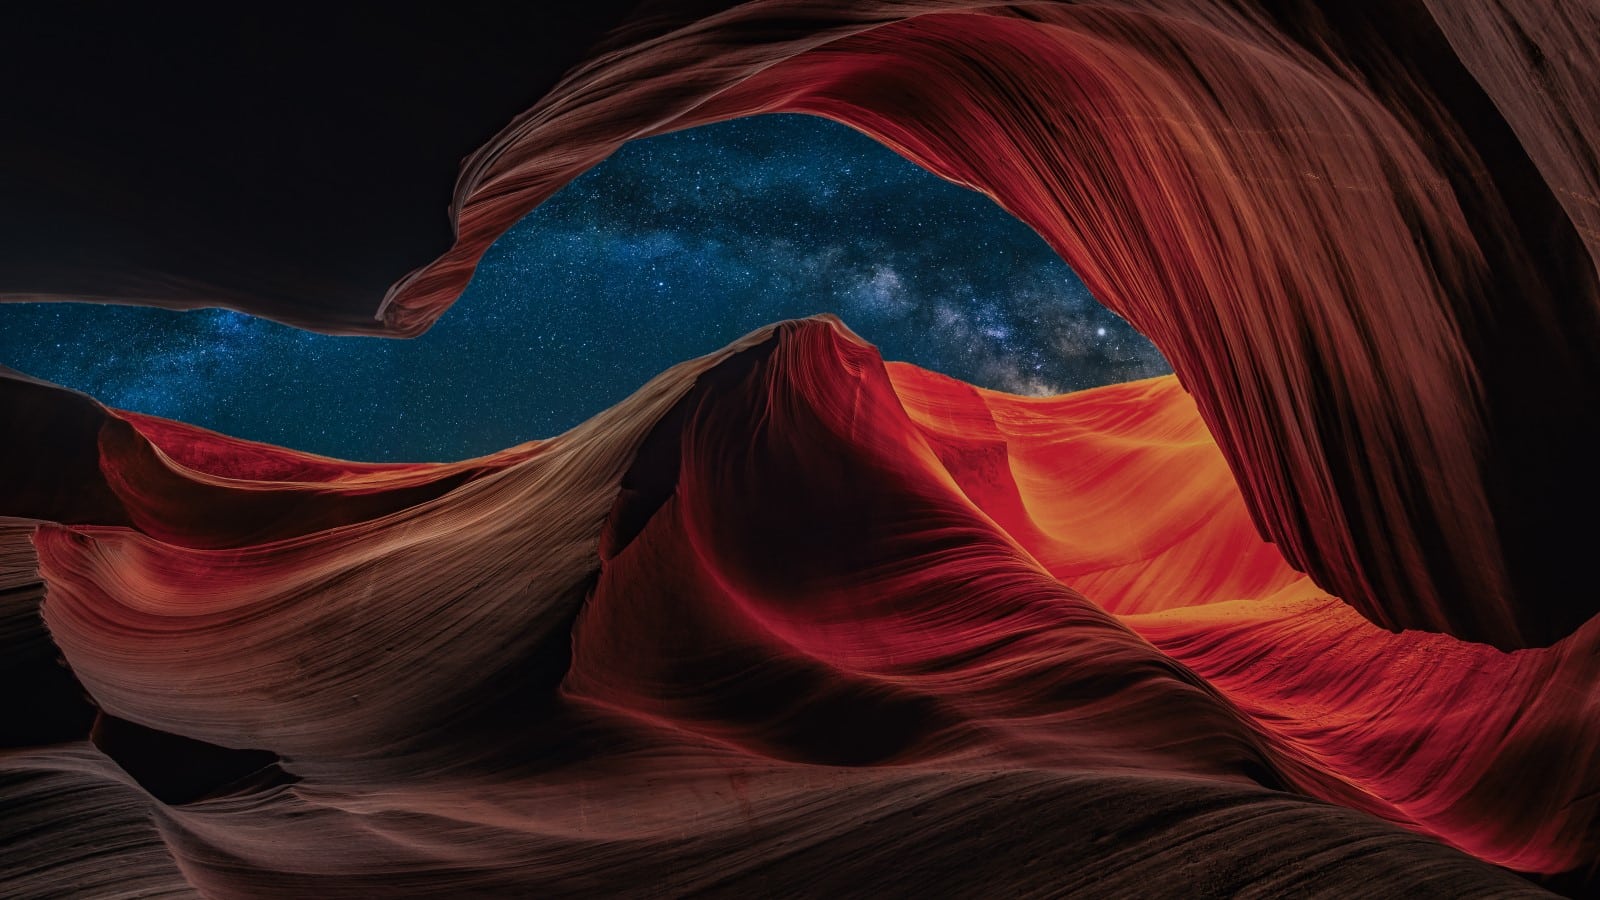 Antelope Canyon at night with a beautiful starry sky at night with the galaxy in the background